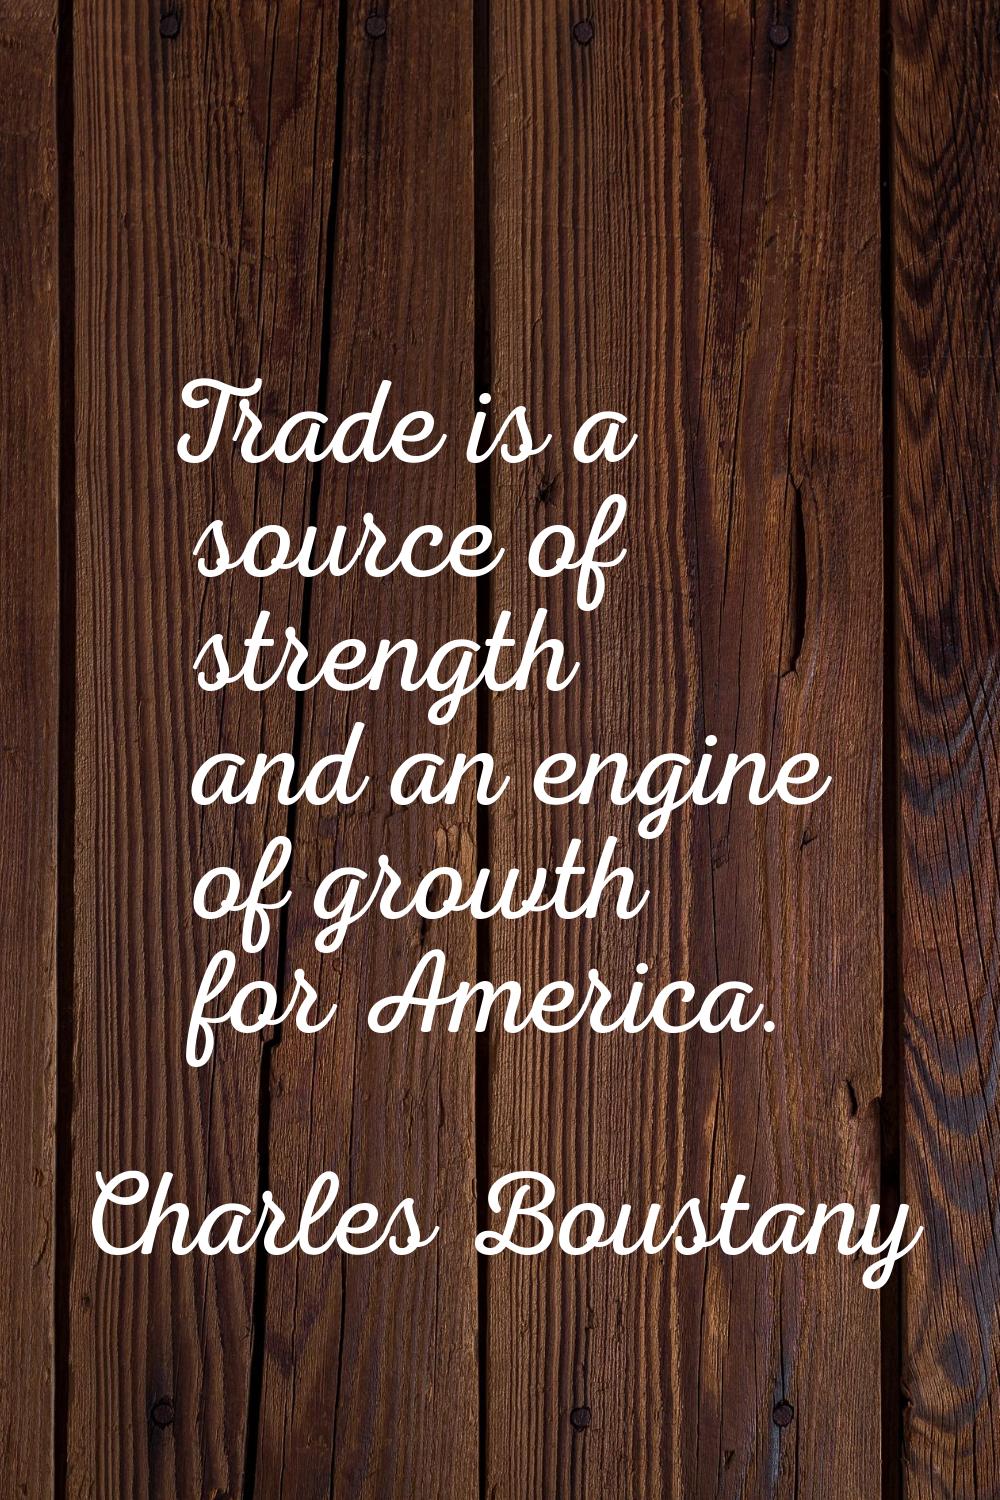 Trade is a source of strength and an engine of growth for America.